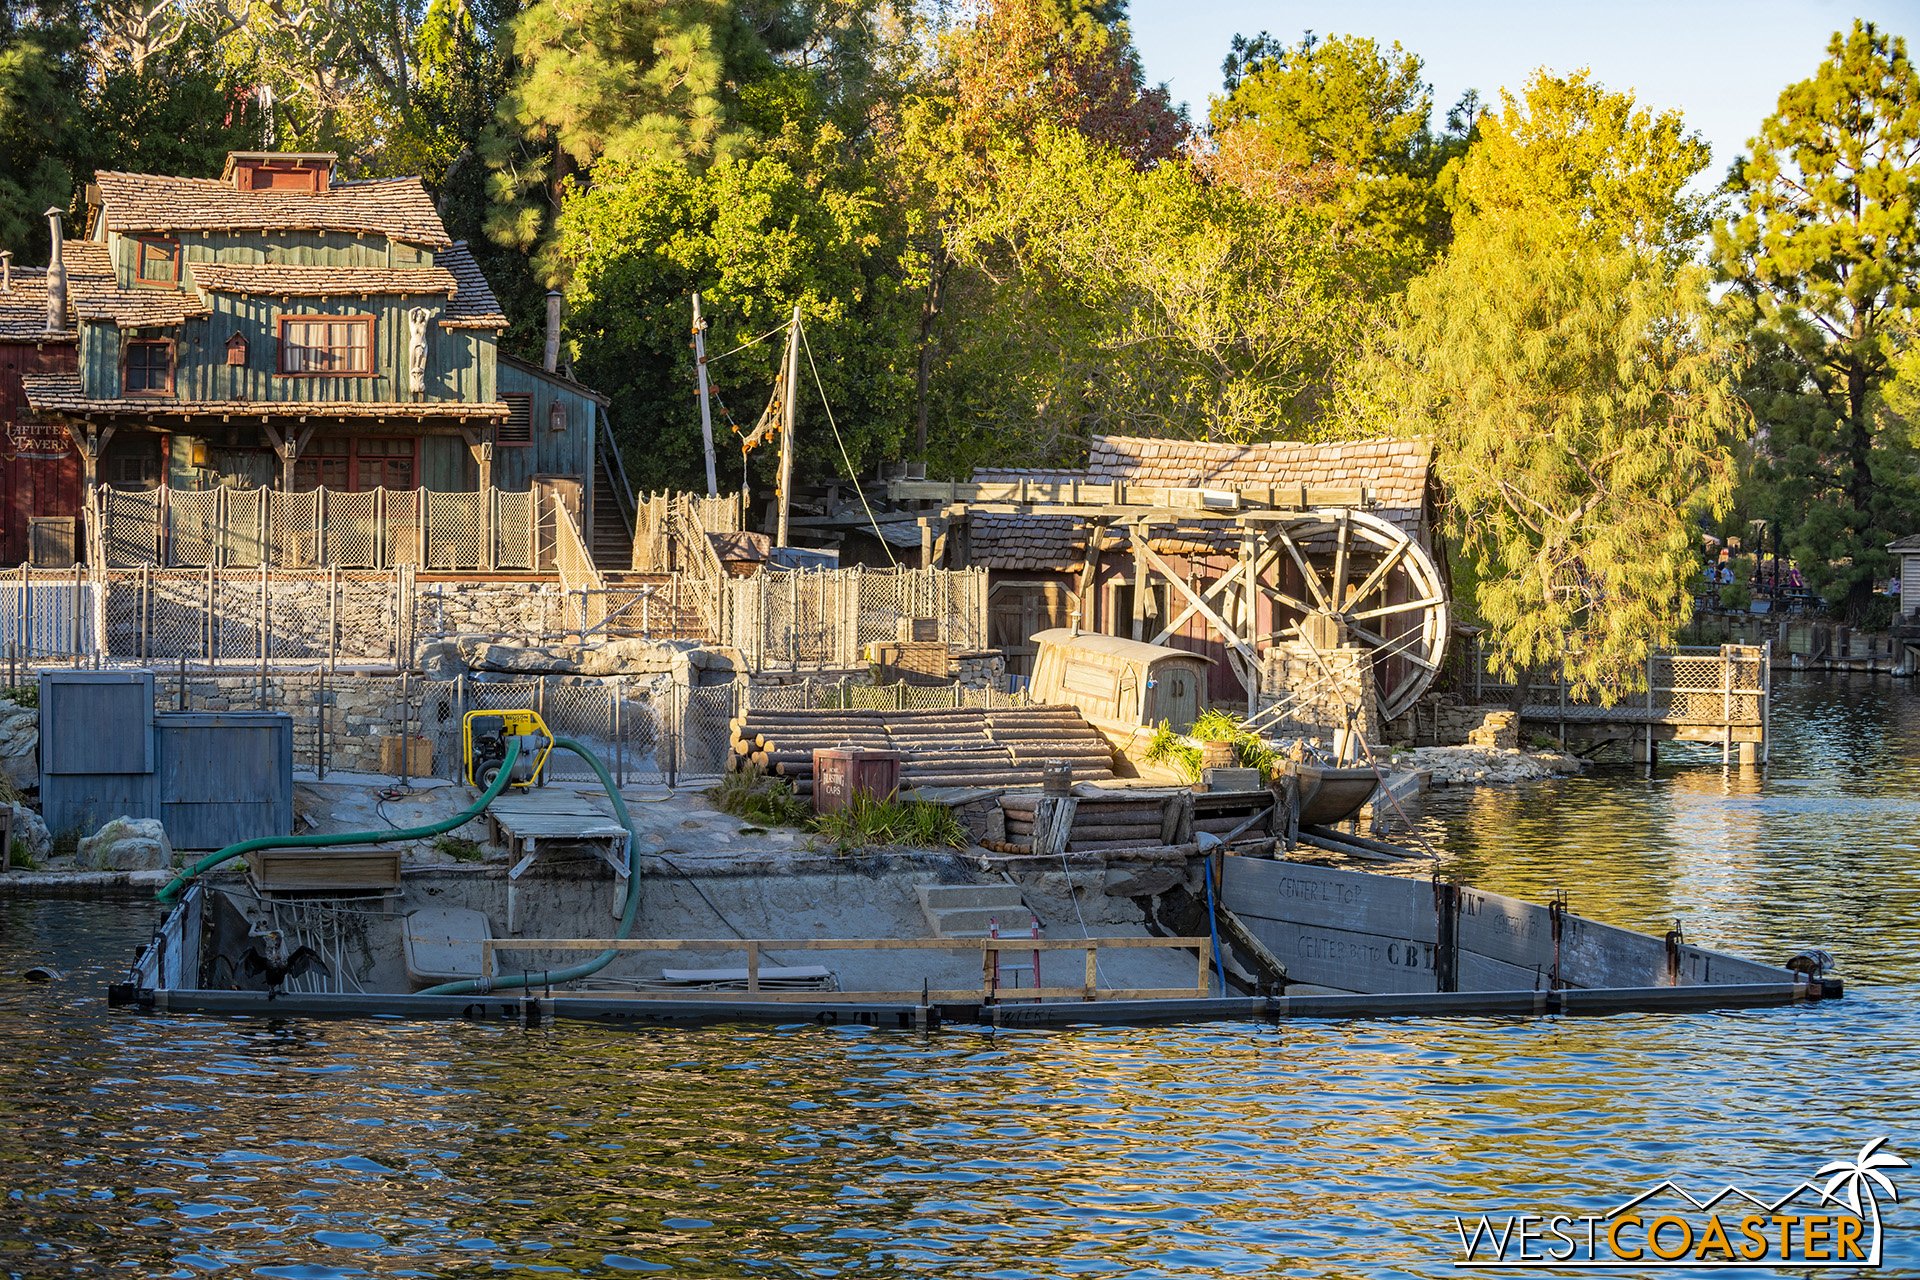  Just fixing things up to make sure FANTASMIC! will be fantastic when it returns. 